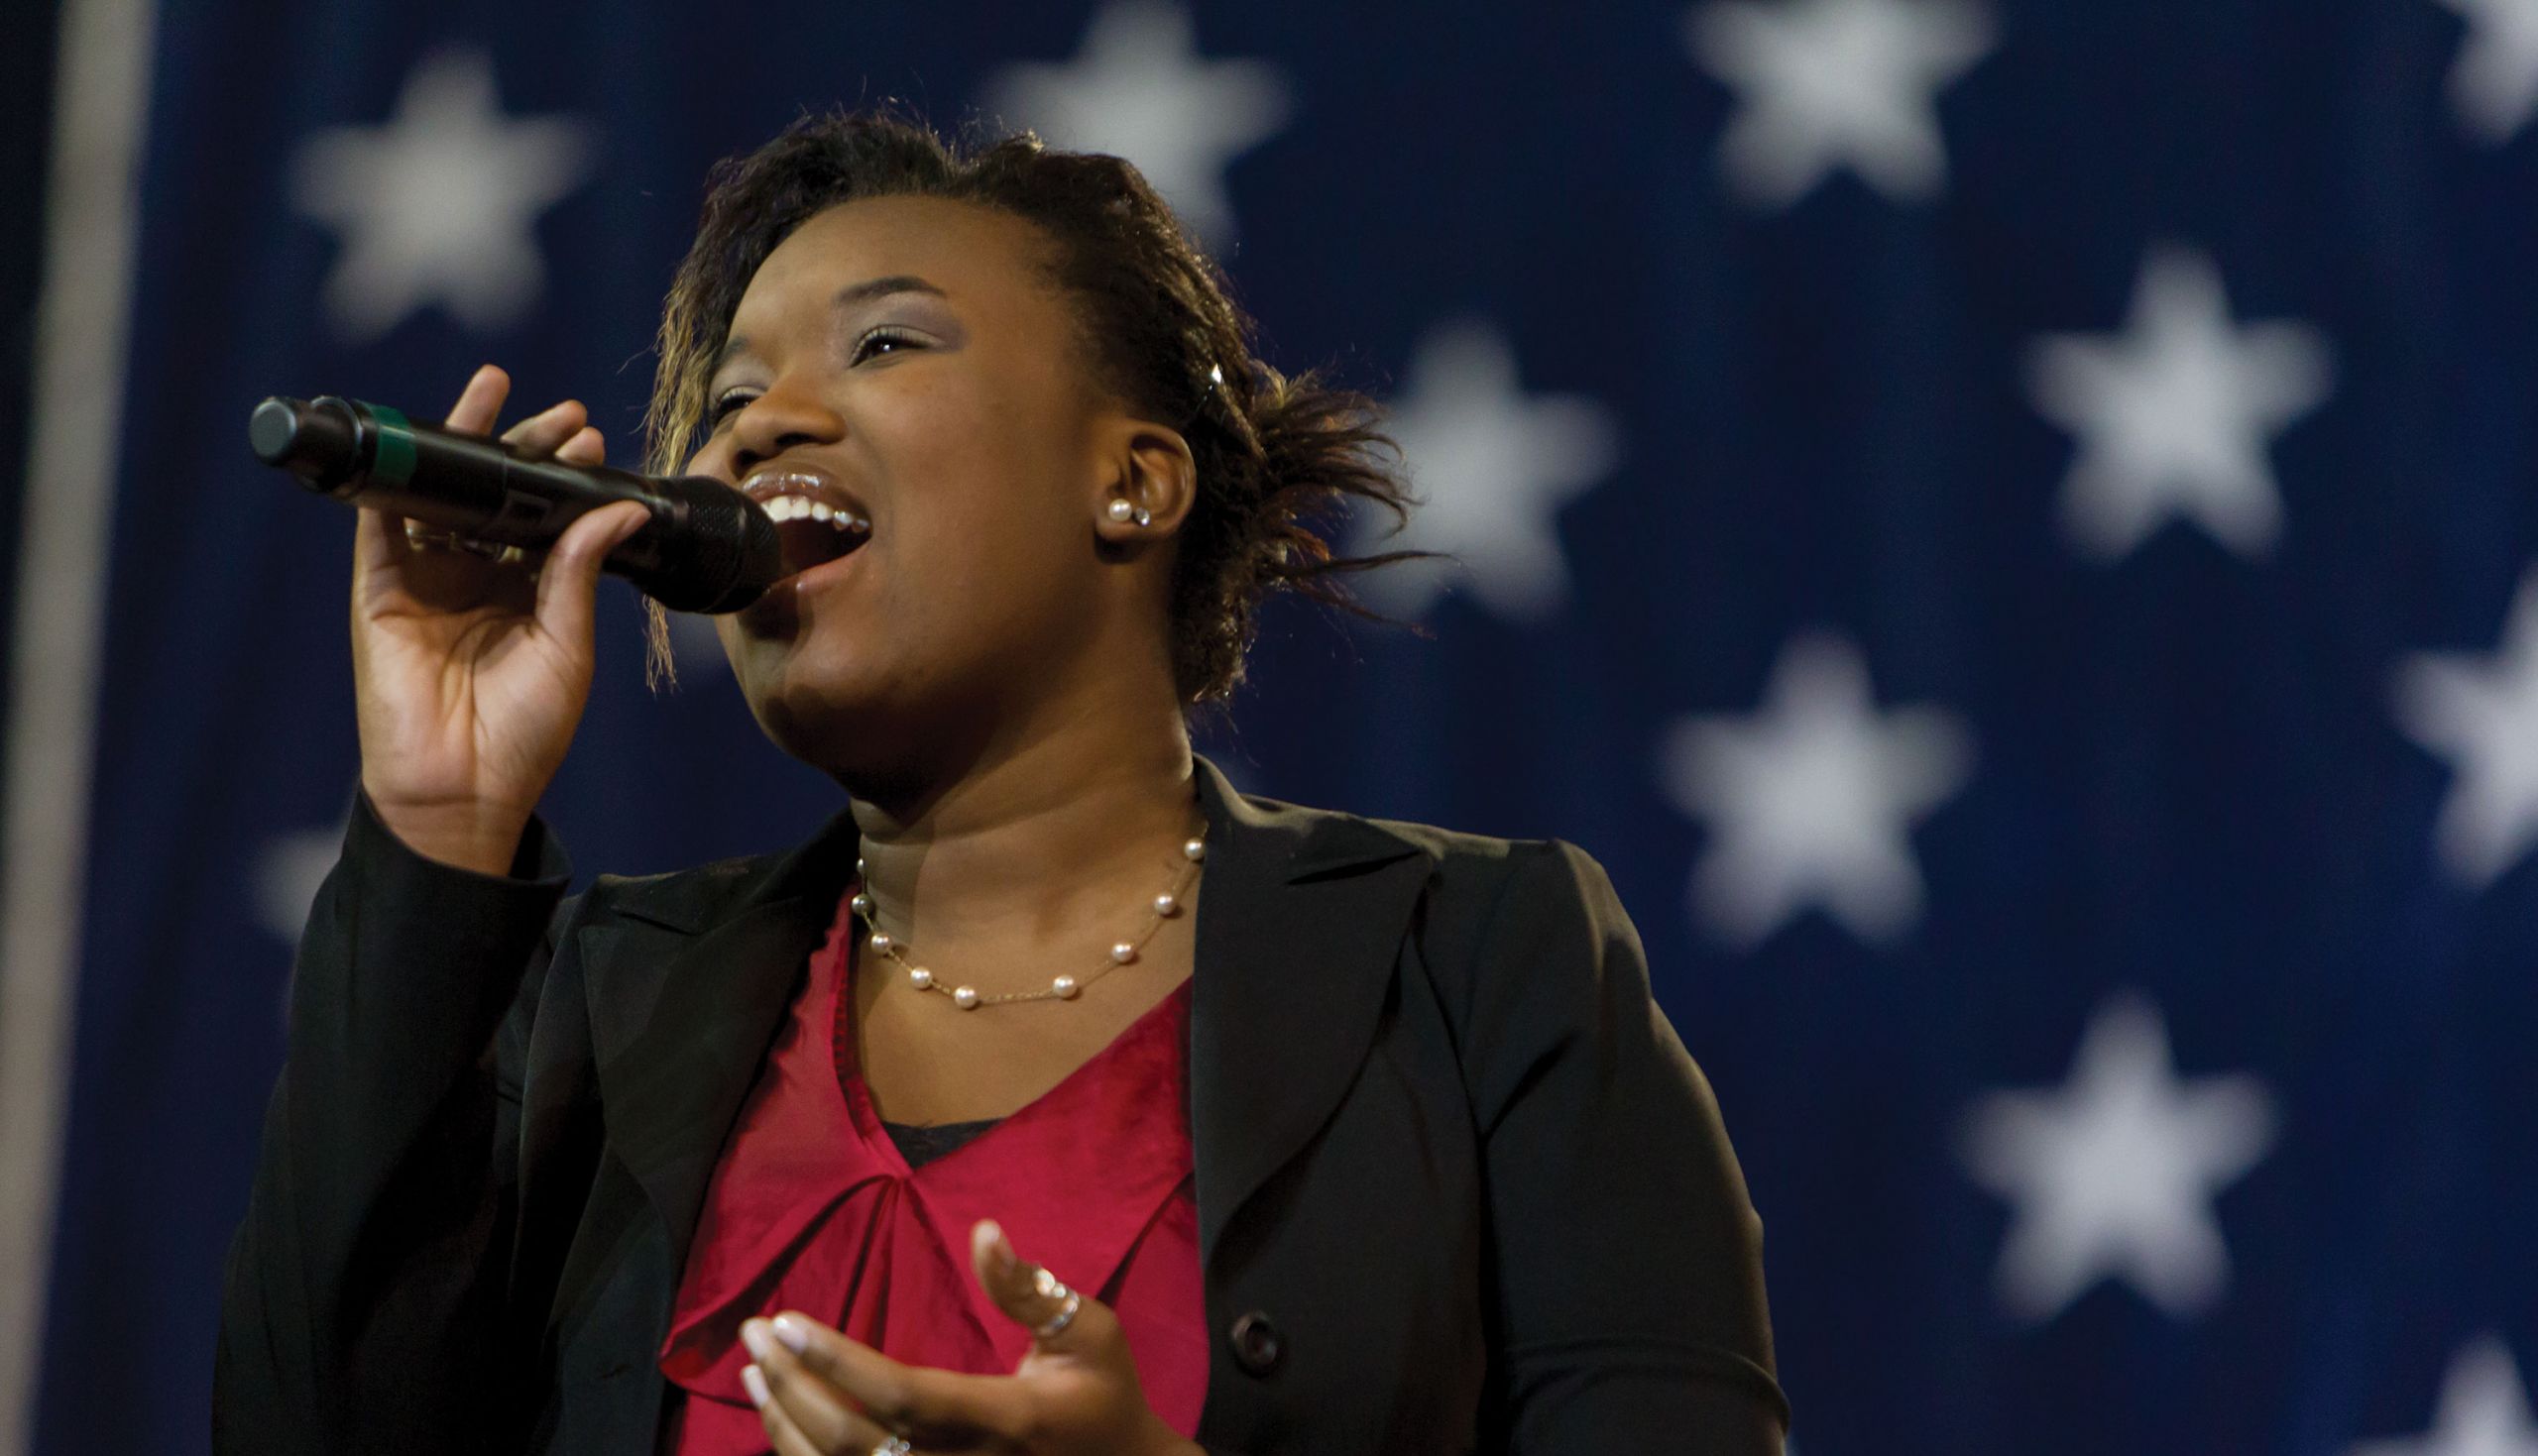 A Sounds of Liberty vocalist performs.